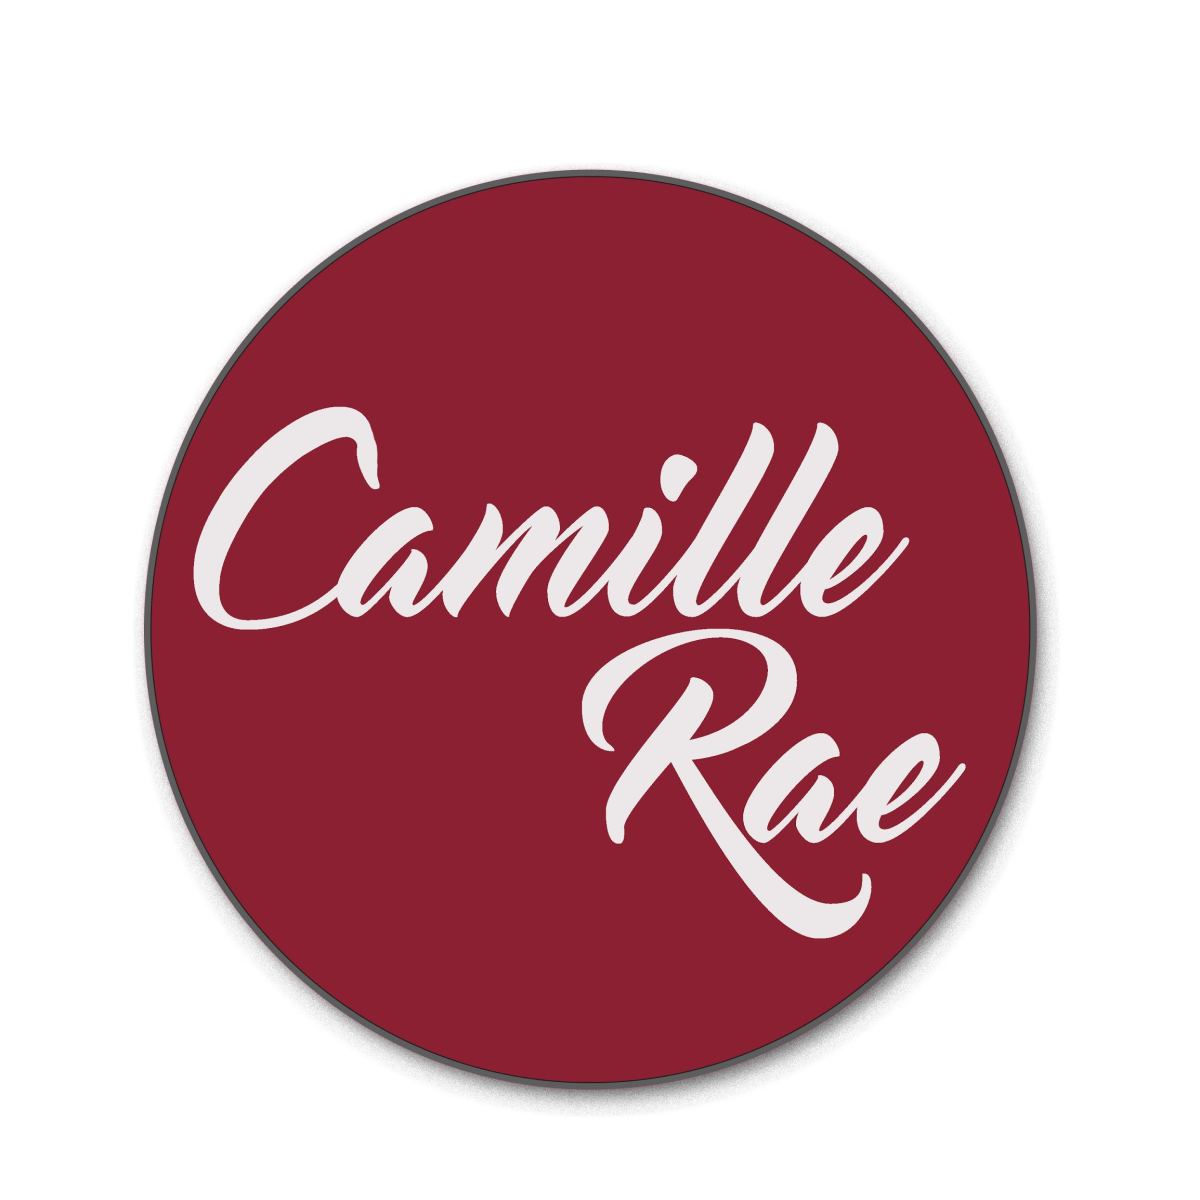 talented-ambitious-but-i-want-you-singer-camille-rae-shares-her-drive-to-succeed